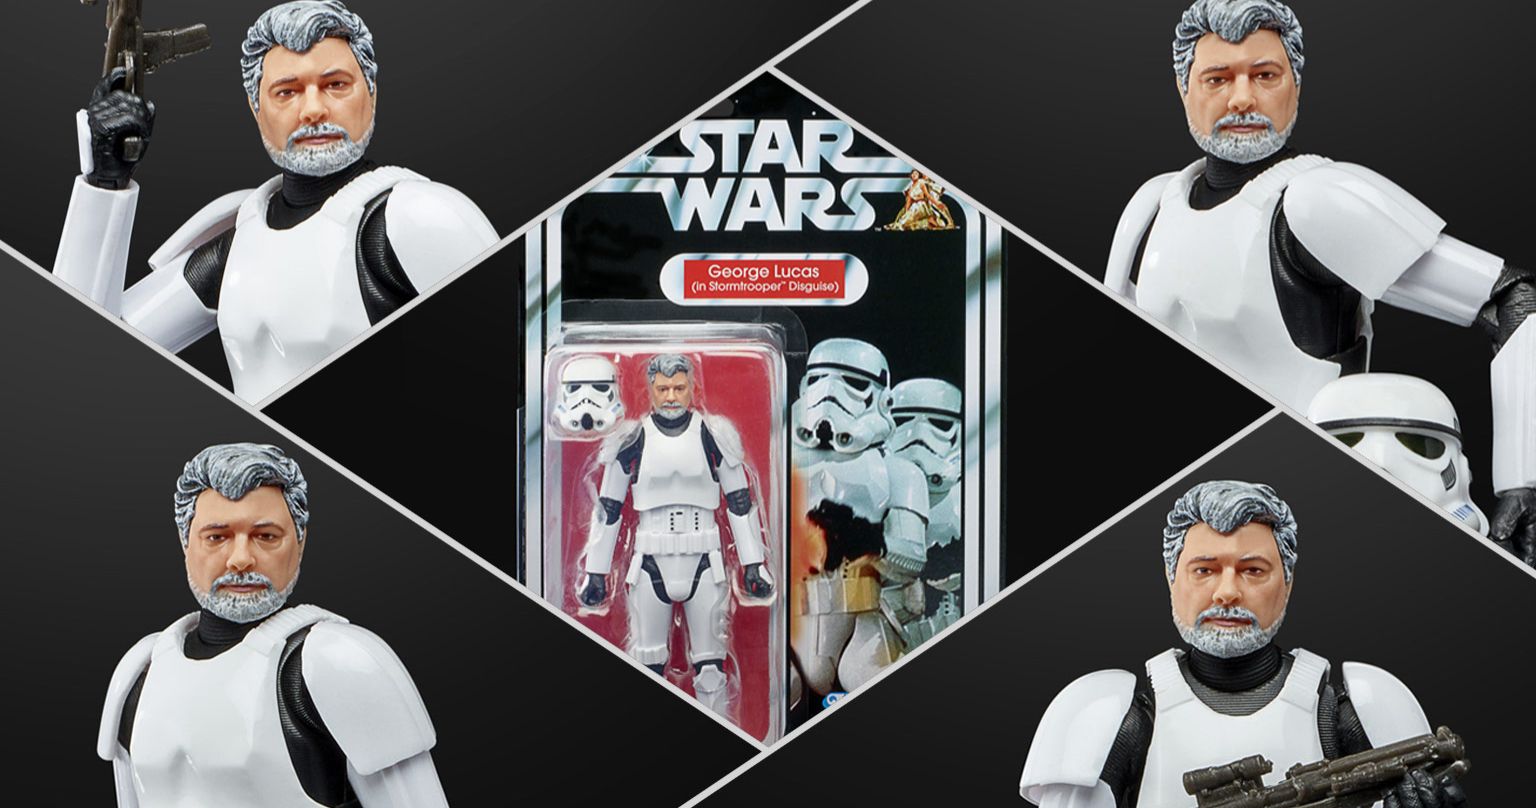 George Lucas Gets His Own Star Wars Stormtrooper Black Series Action Figure from Hasbro